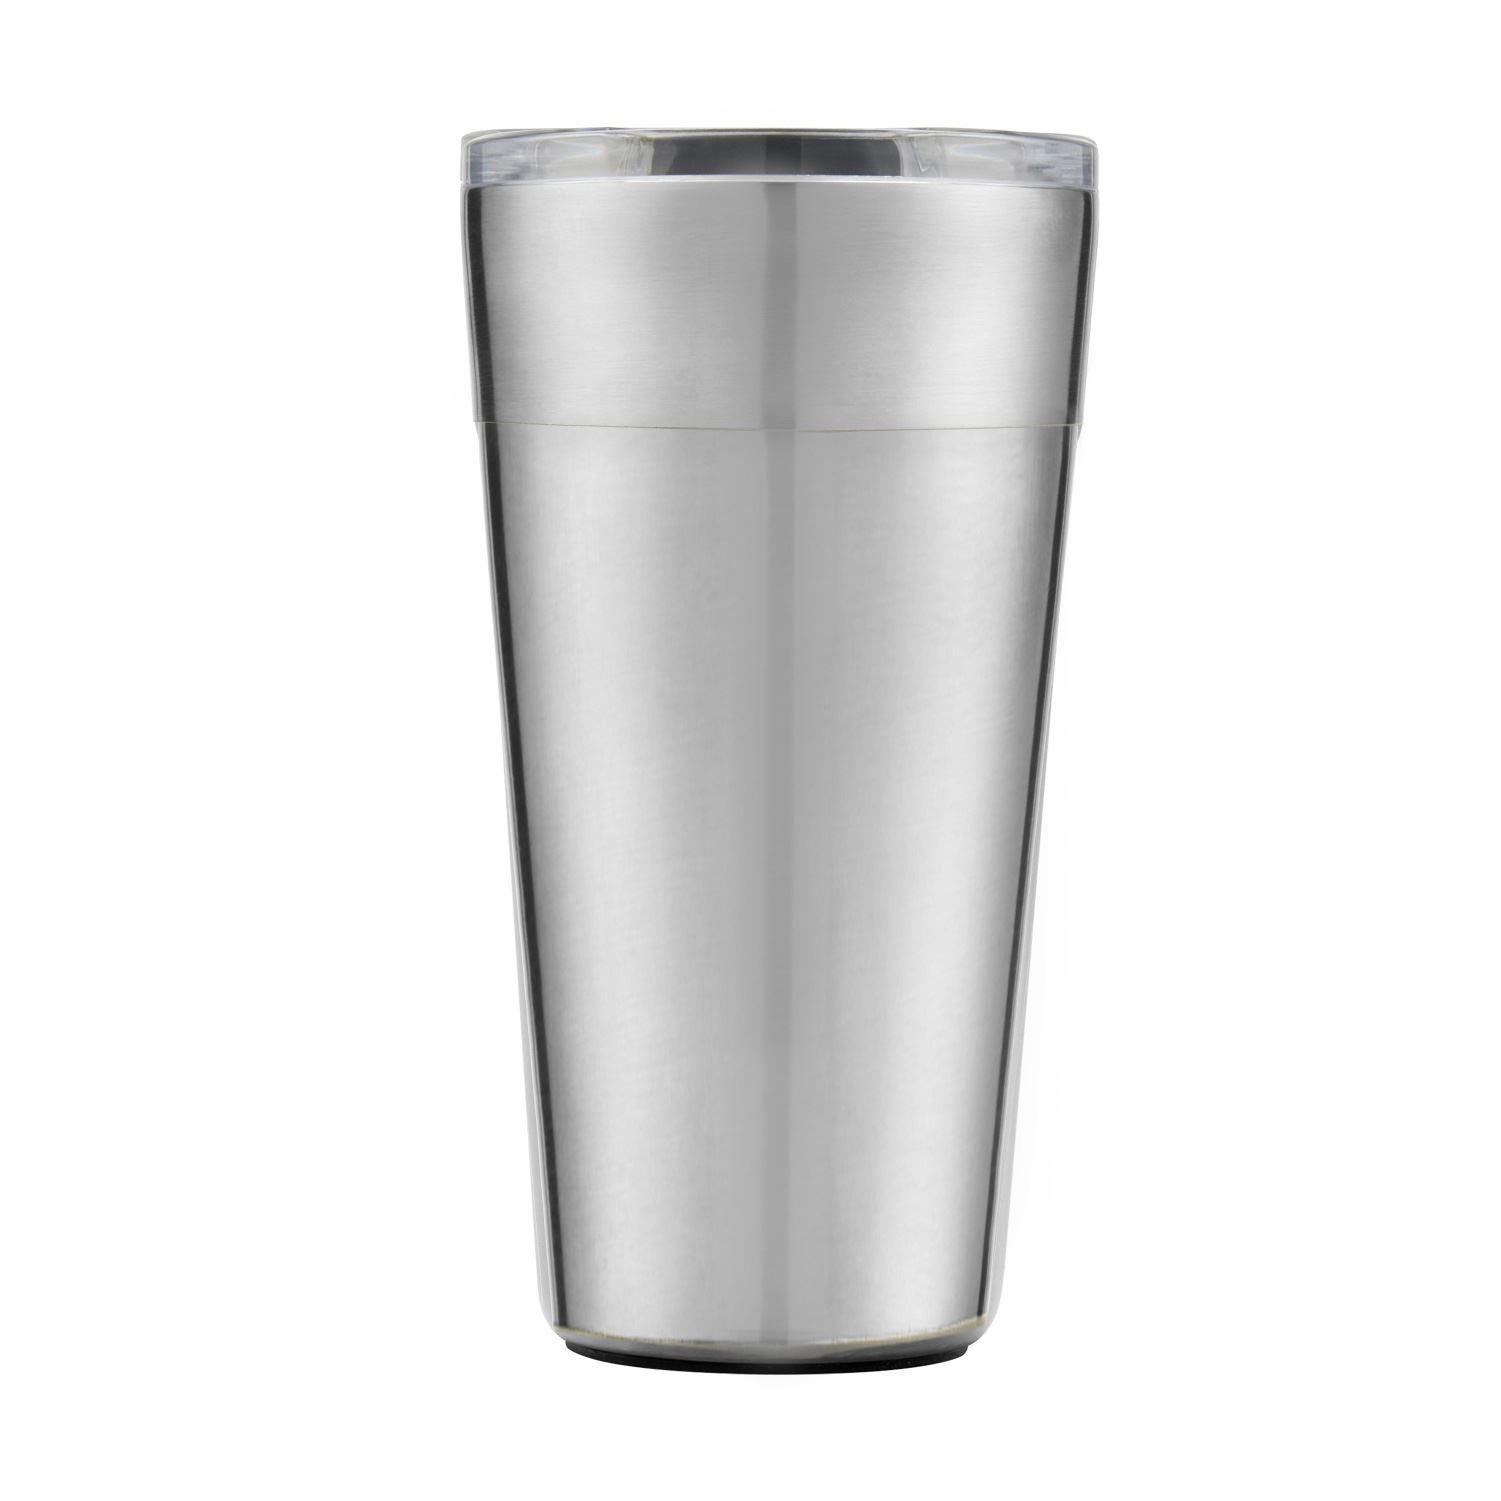 Coleman Brew Insulated Stainless Steel Tumbler, 20 oz., Cloud